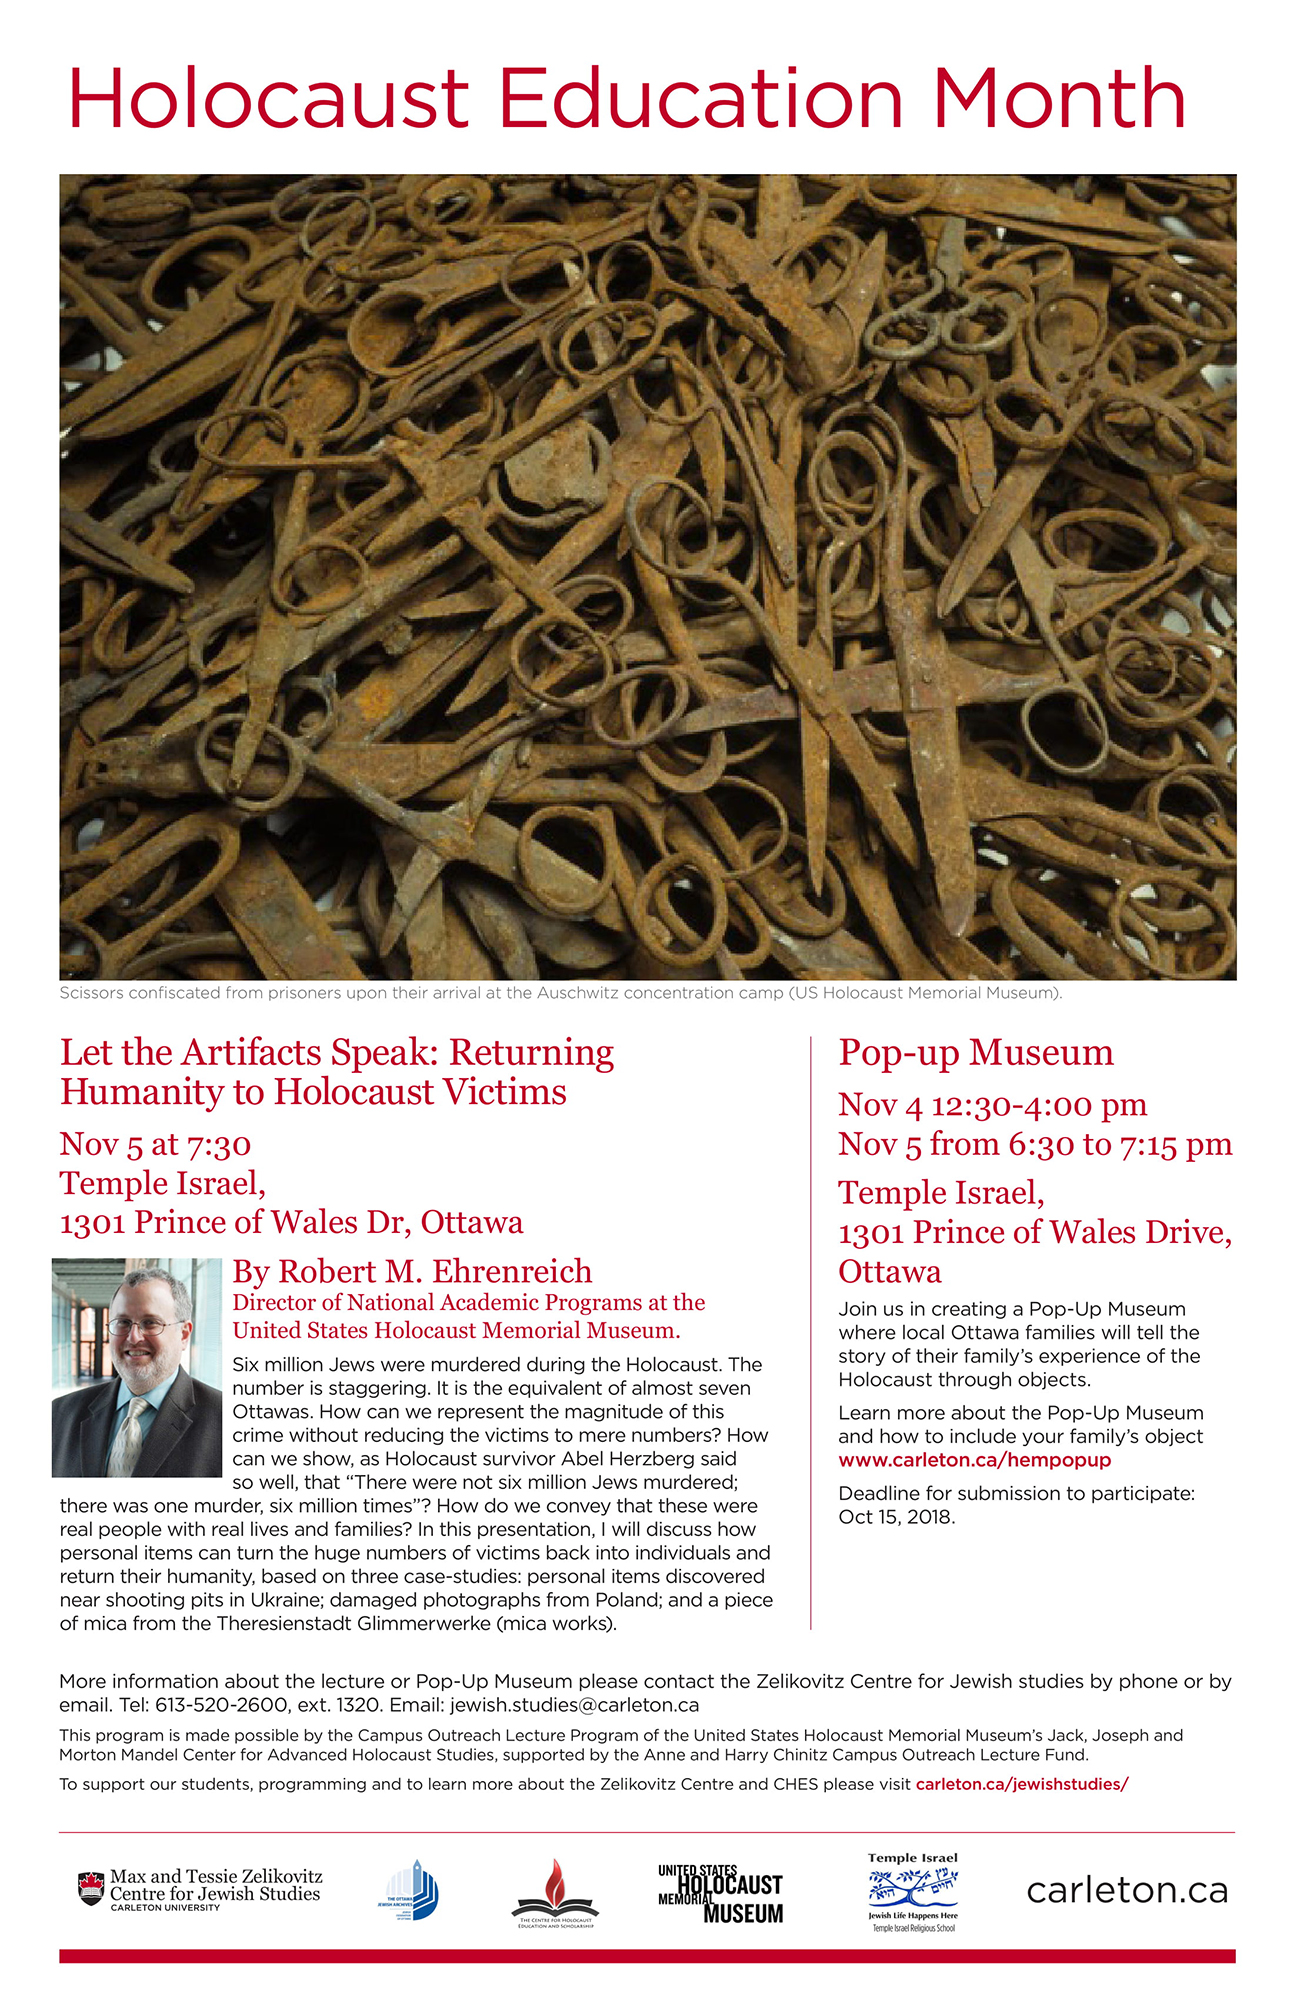 Van ziekenhuis heerser Public Lecture: “Let the Artefacts Speak: Returning Humanity to Holocaust  Victims” with Dr. Robert Ehrenreich of the United States Holocaust Memorial  Museum – Centre for Holocaust Education and Scholarship